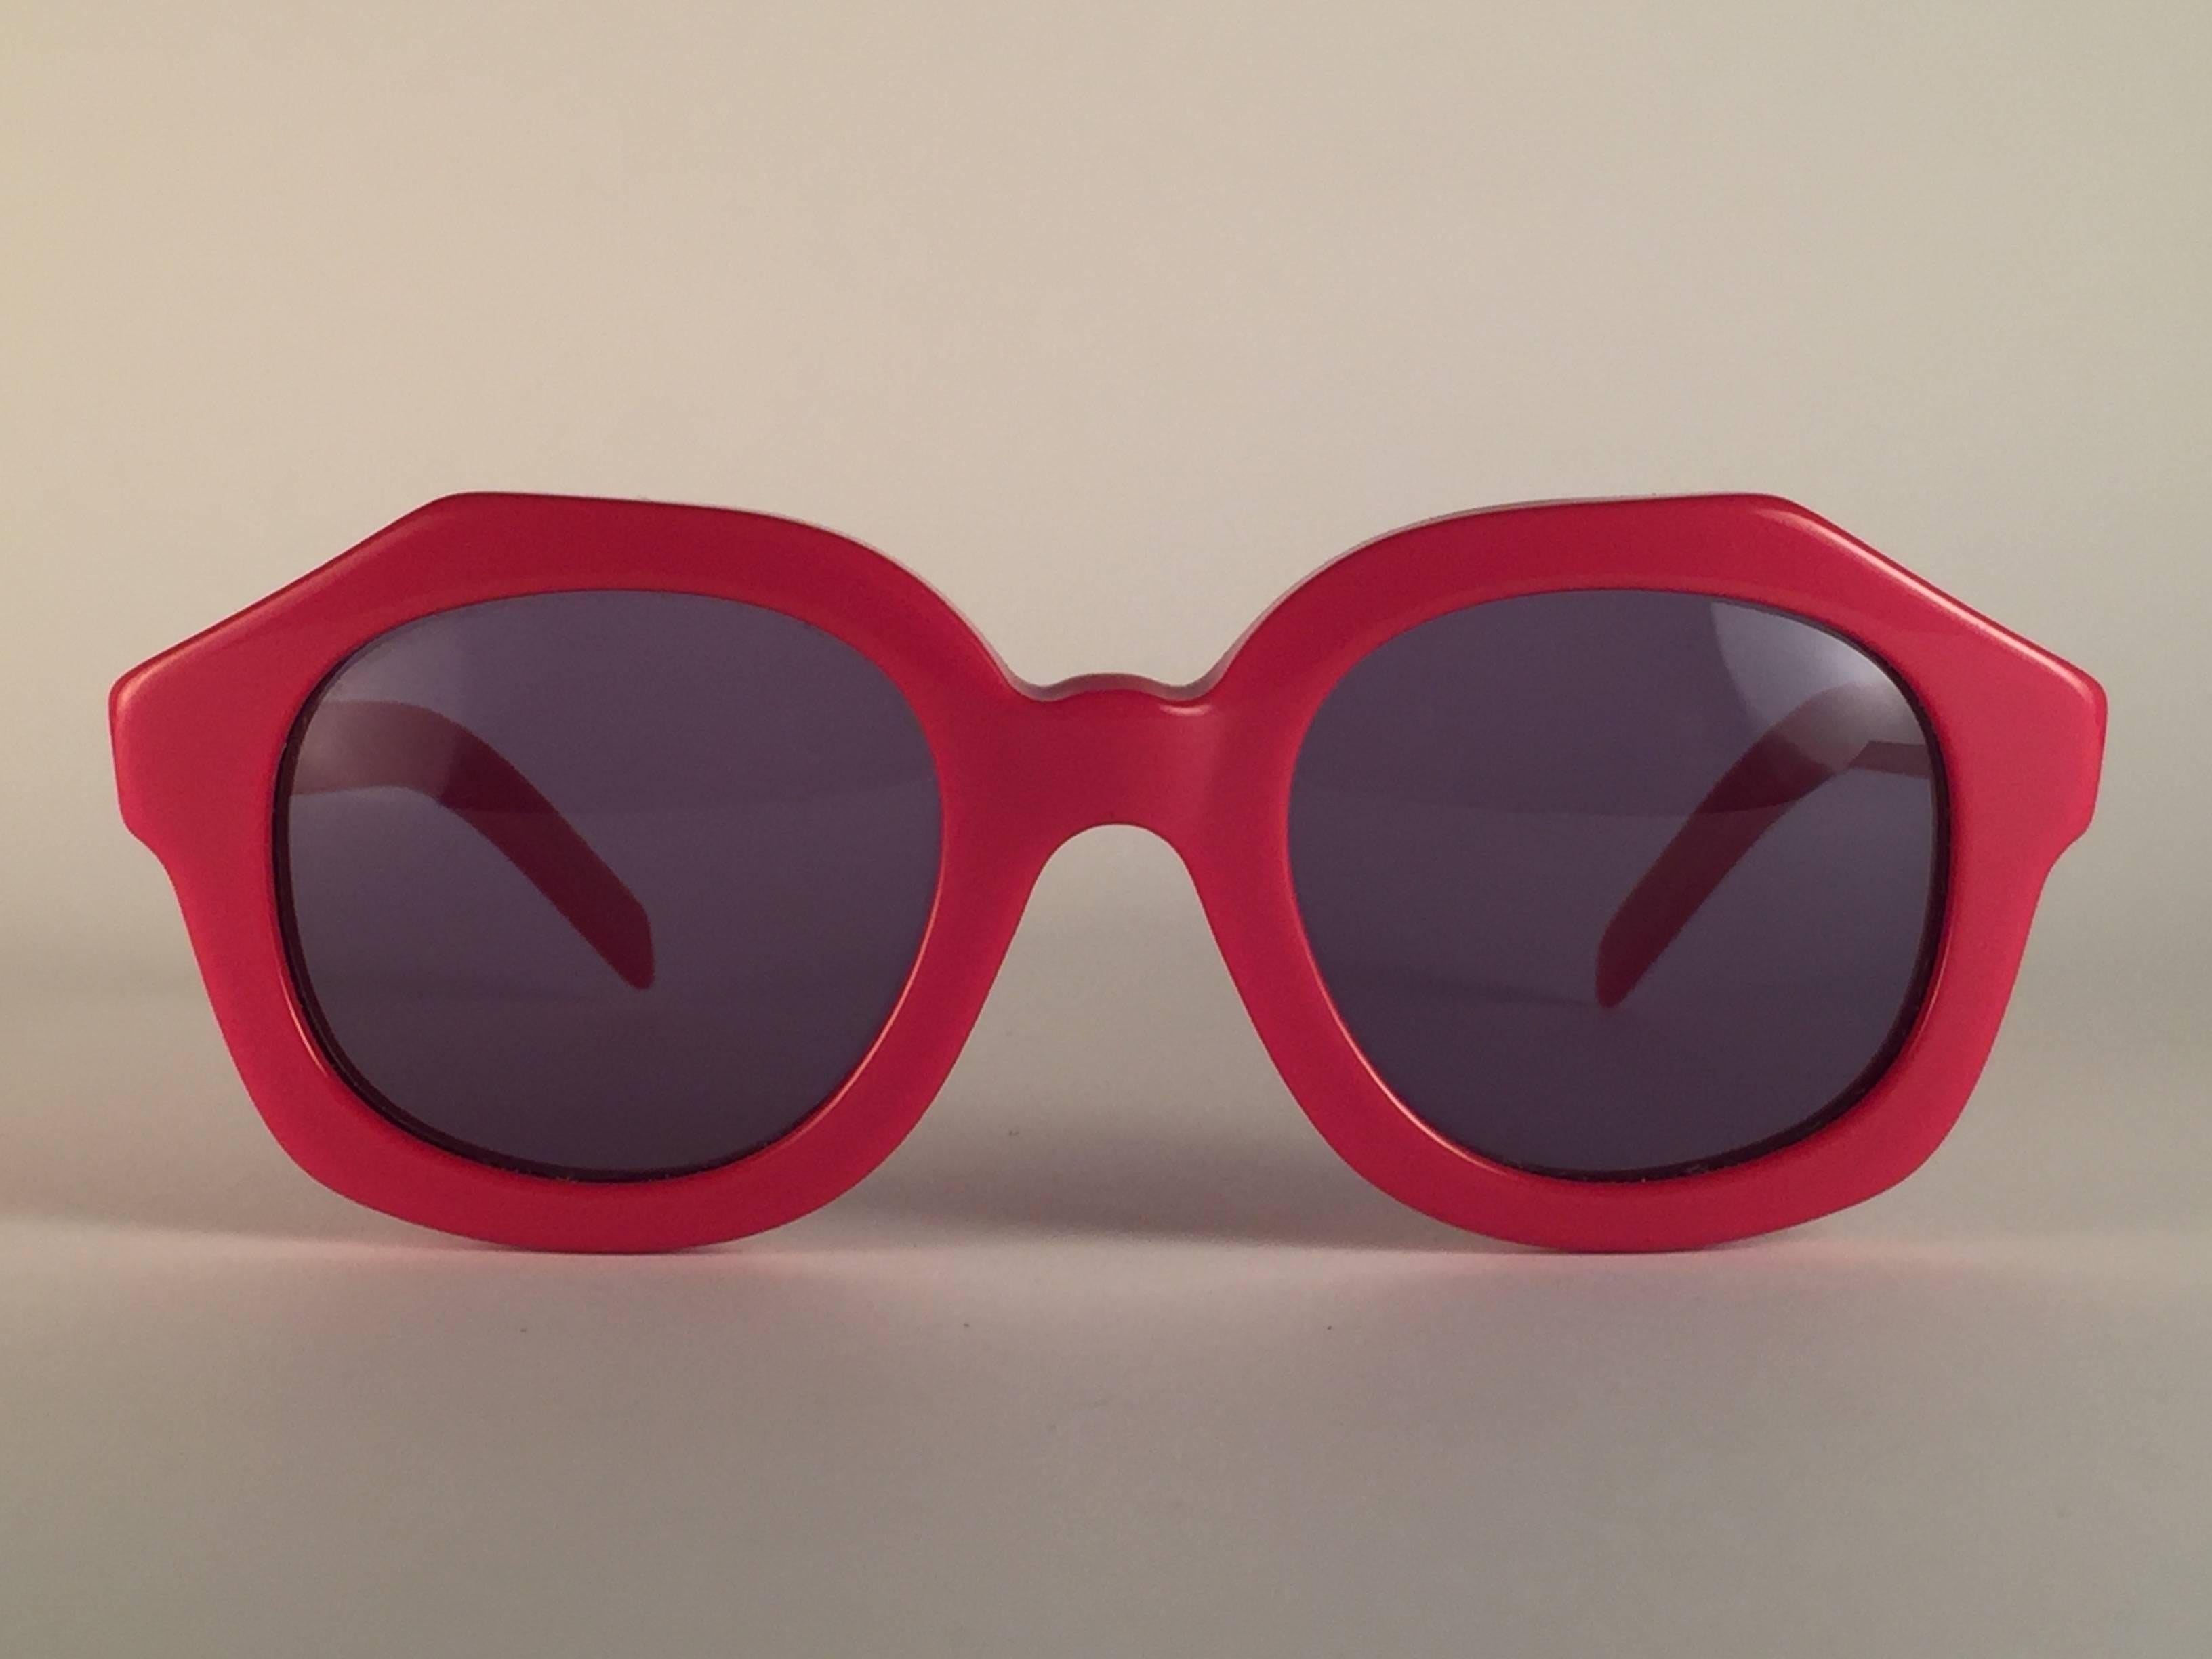 New Vintage Alain Mikli candy red frame.

Rare item in new and unworn condition. Spotless dark grey lenses.

Please consider that this item is nearly 40 years old so it could show minor sign of wear due to storage.

Comes with its original Alain